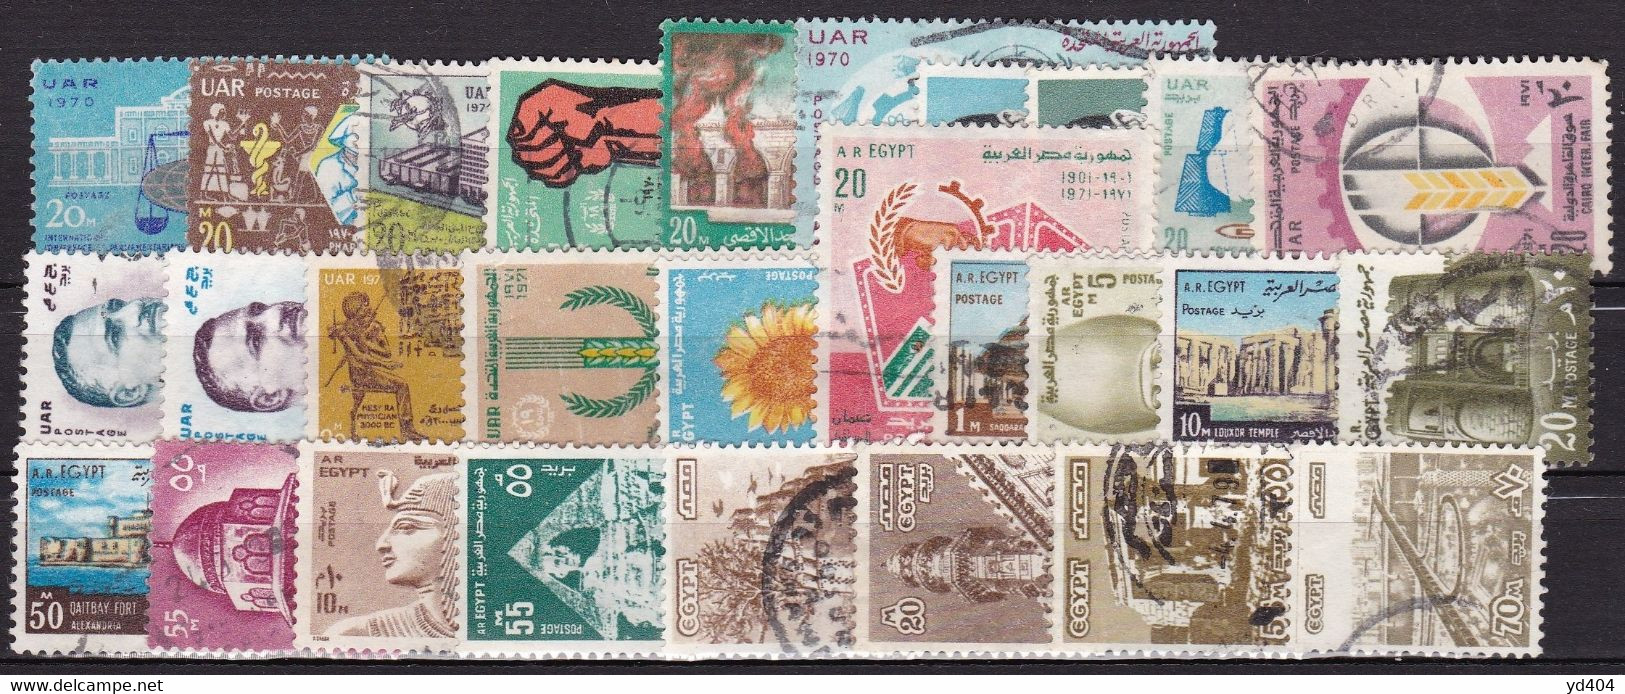 EG154 – EGYPTE – EGYPT - 1970→1979 - NICE COLLECTION – Y&T # 805→1092 USED 8,25 € - Used Stamps